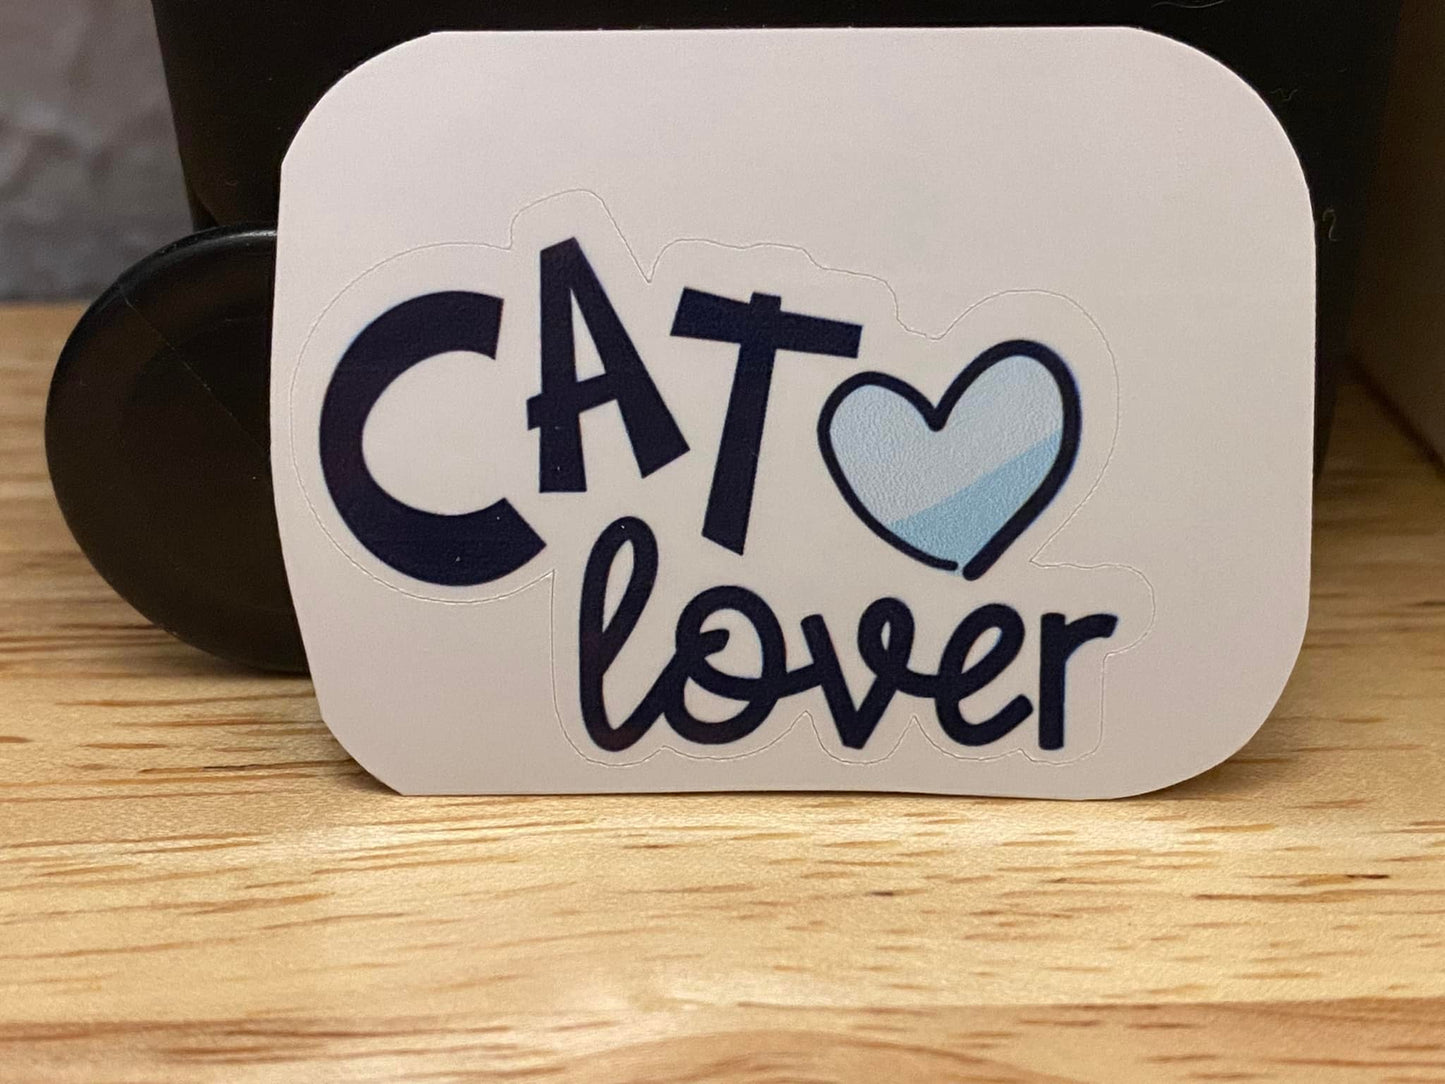 Blue Heart with Cat Lover STICKER